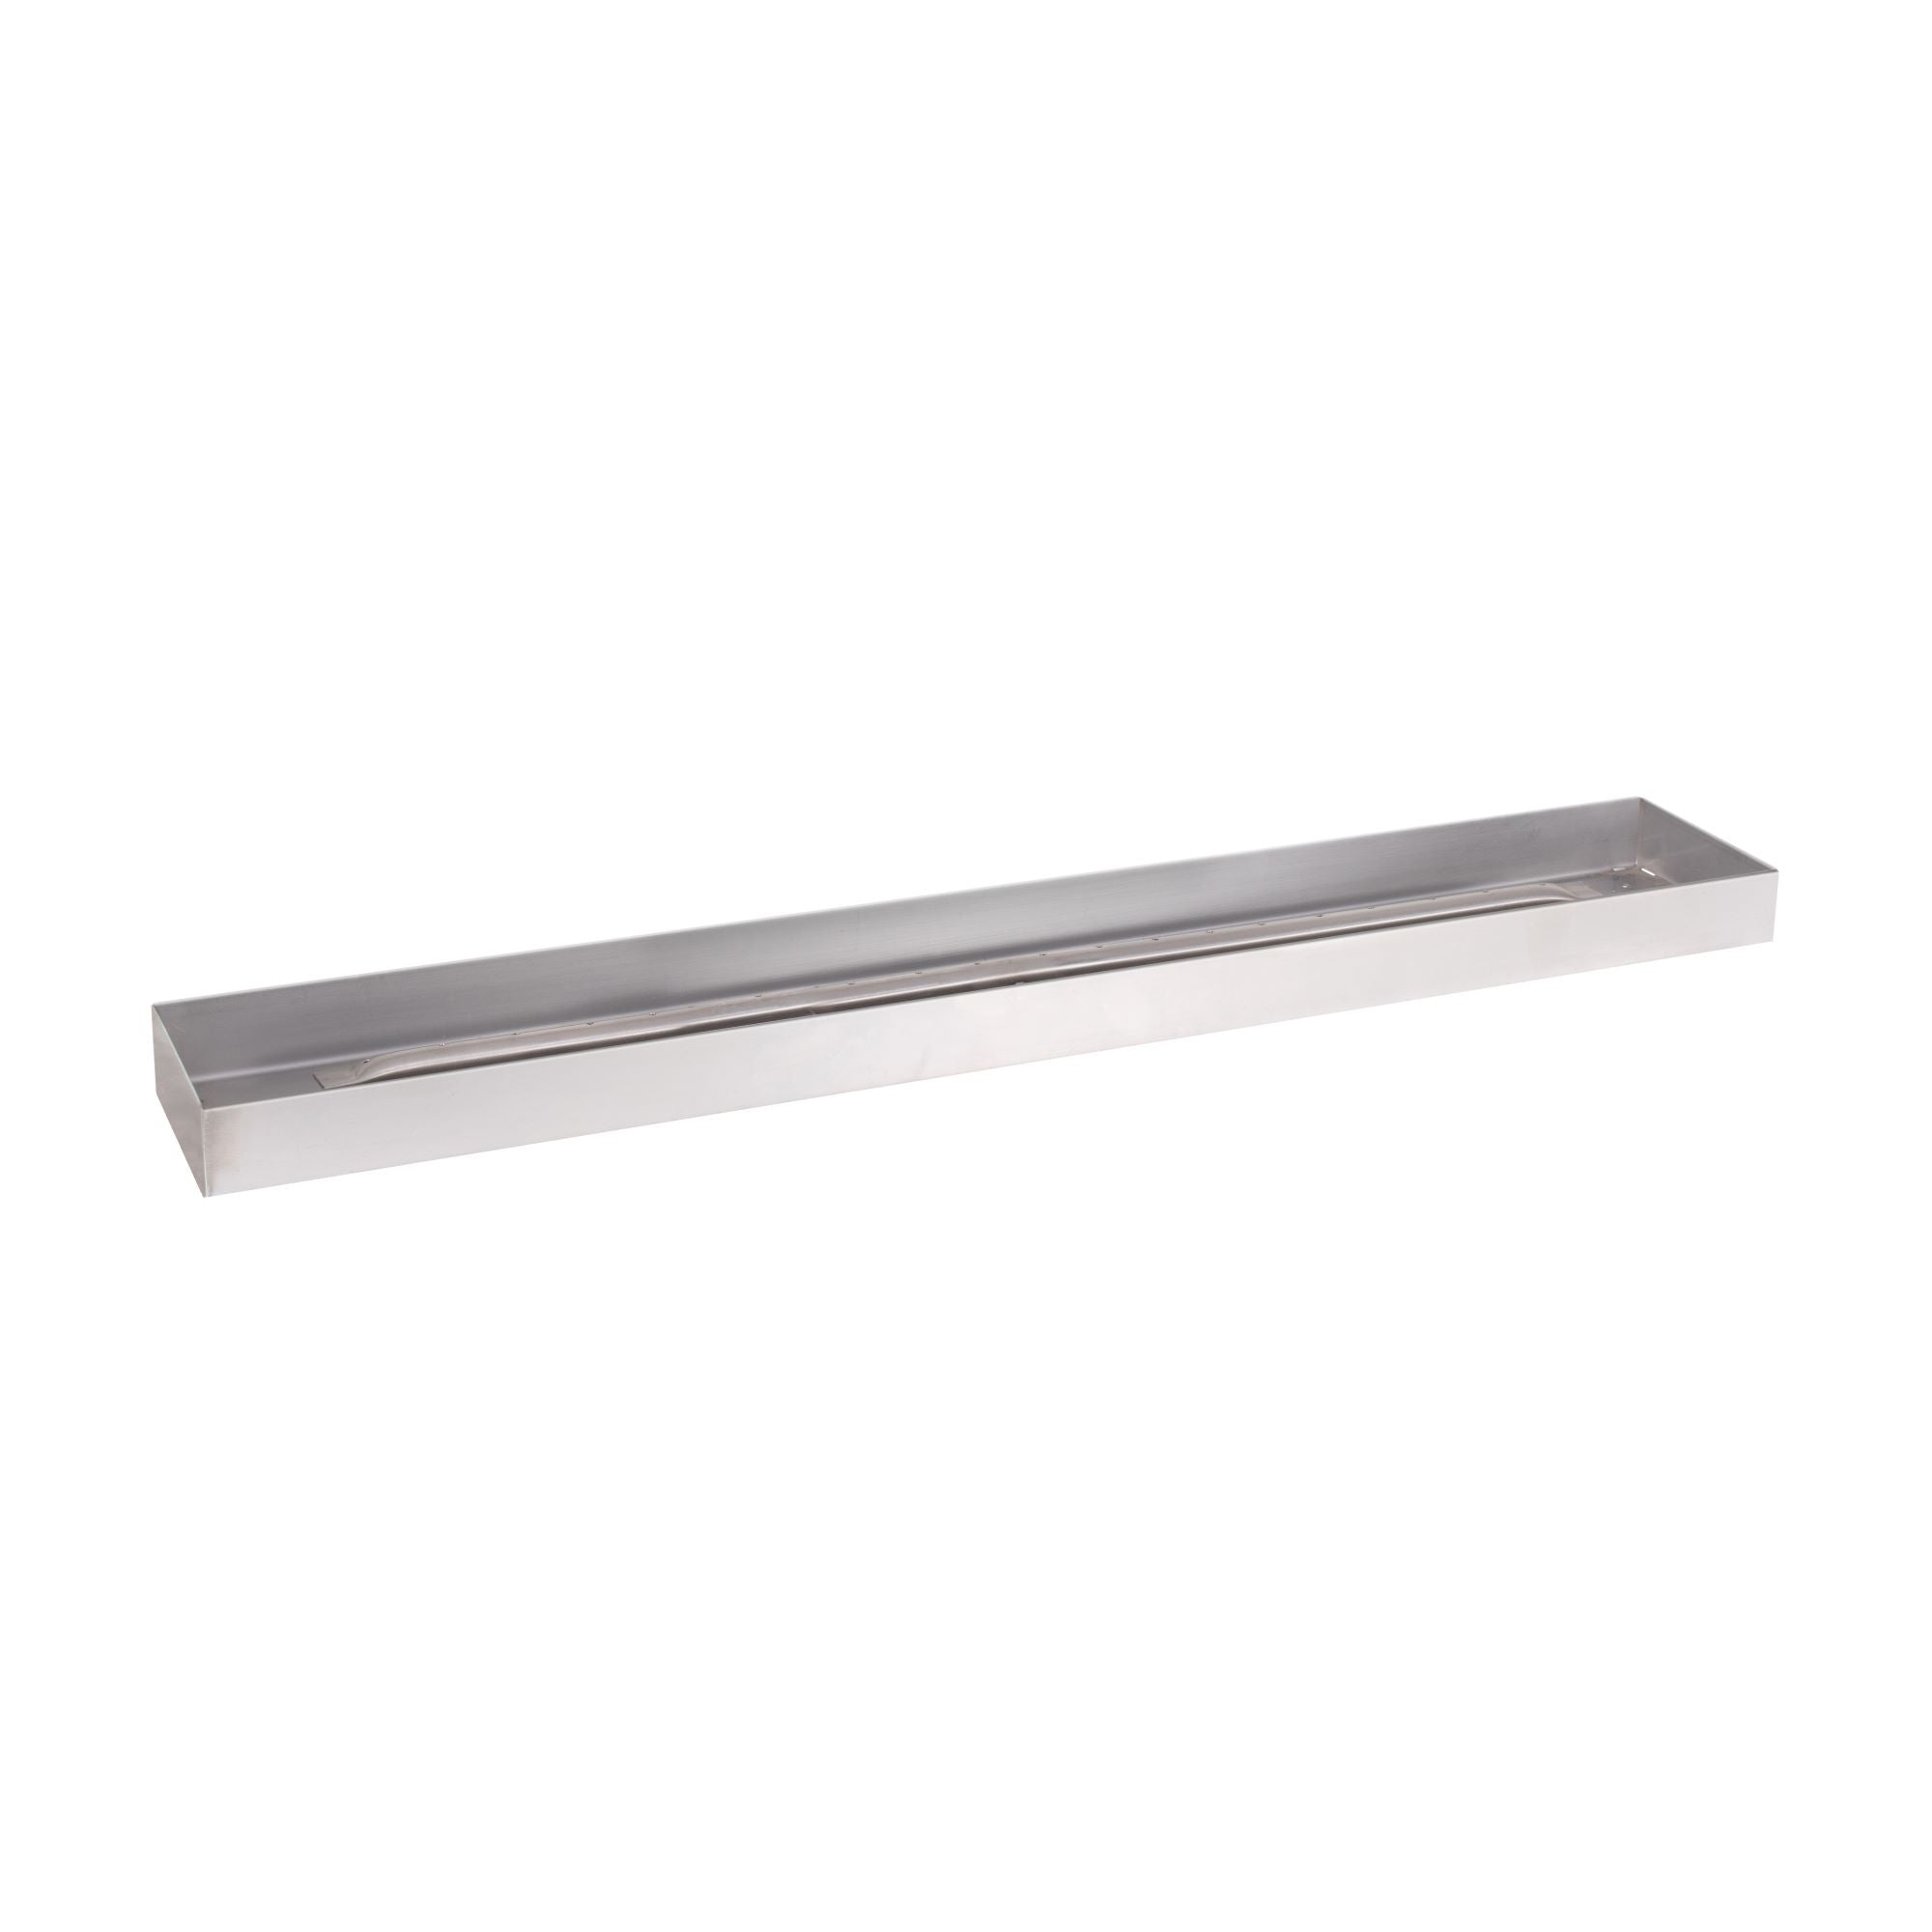 The Outdoor Plus Rectangular Raised Lip Drop-in Pan with Stainless Steel Linear Burner